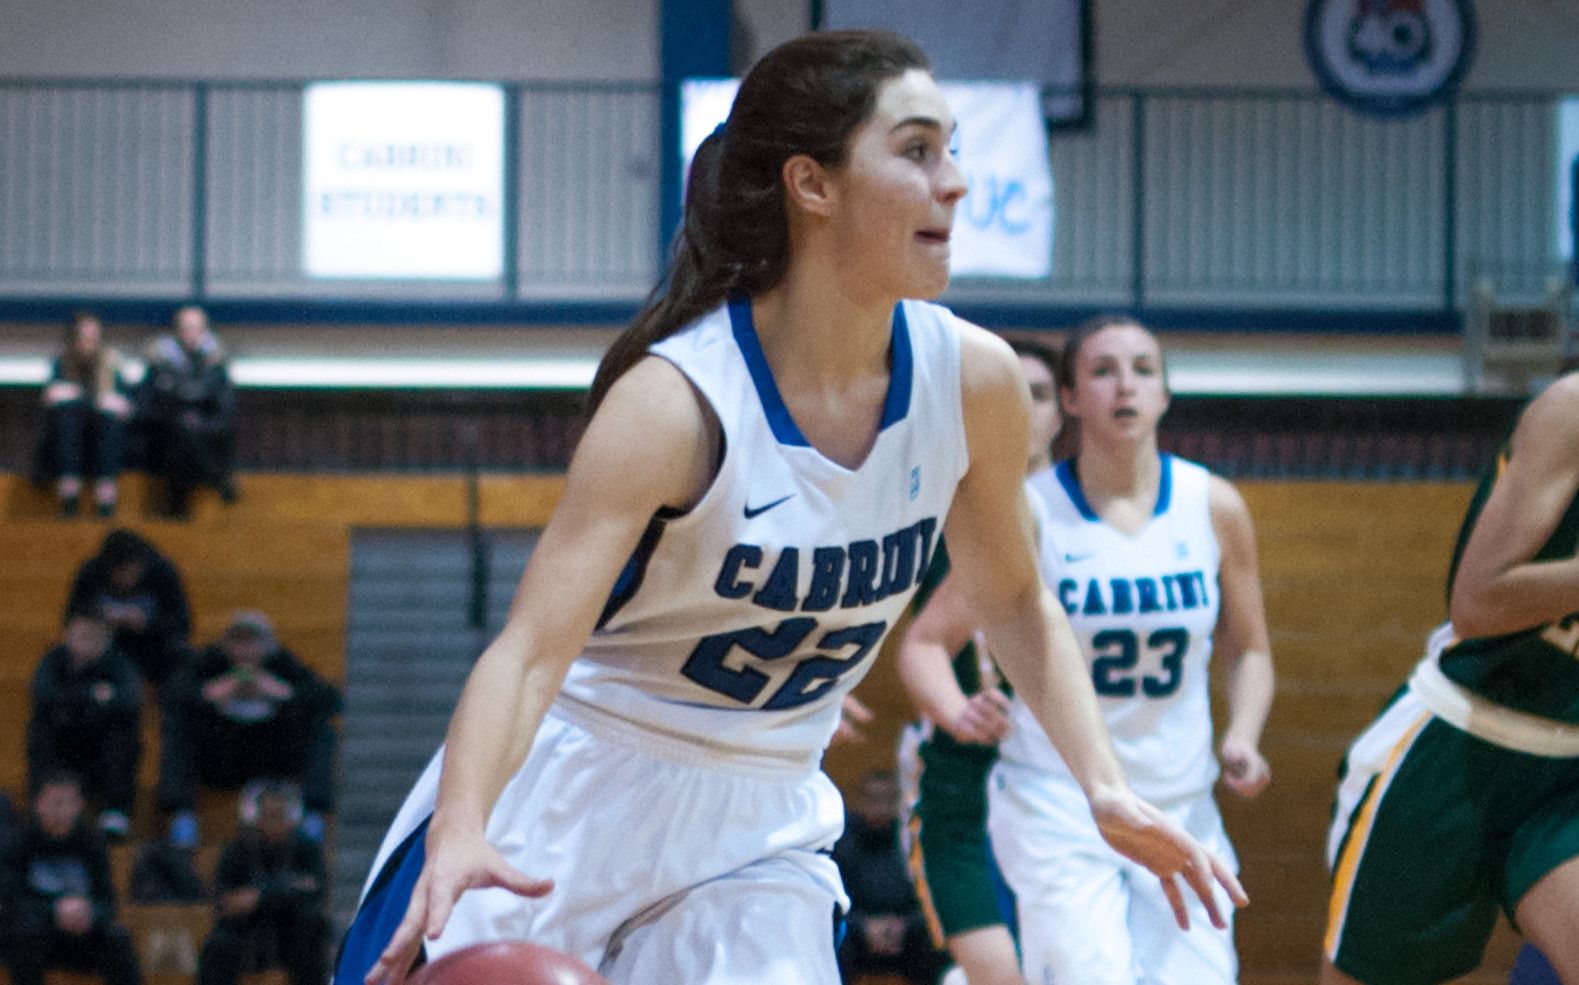 Senior Brittany Sandone added 16 points to the scoreboard in Saturday's win against Marywood. (Dan Luner/Photo Editor)